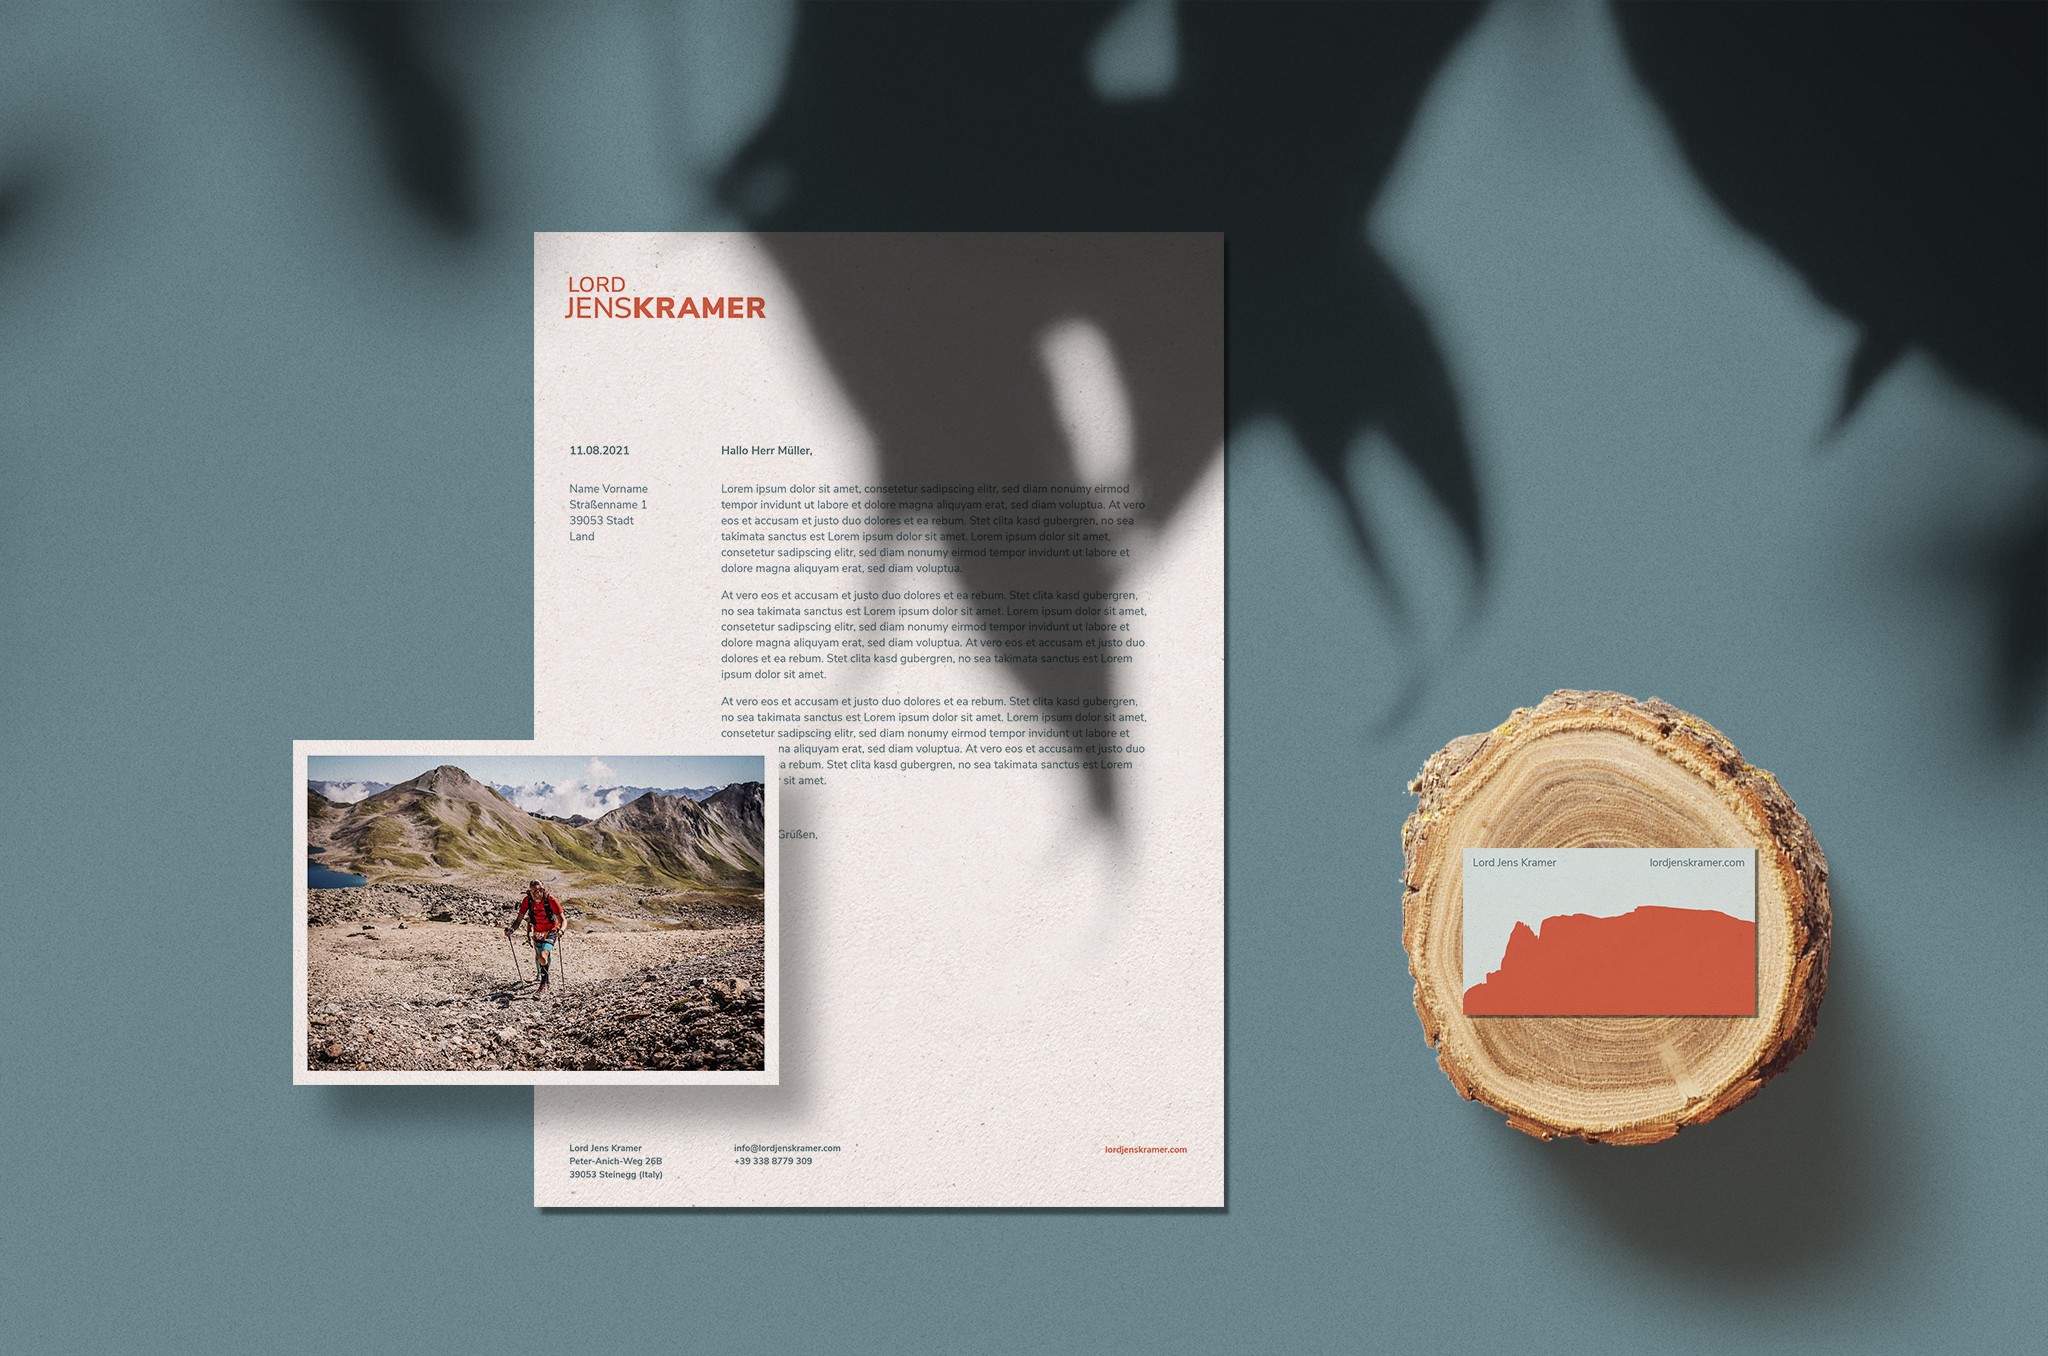 The image displays a set of branding materials for a trail runner, including a letterhead, photograph, and business card.